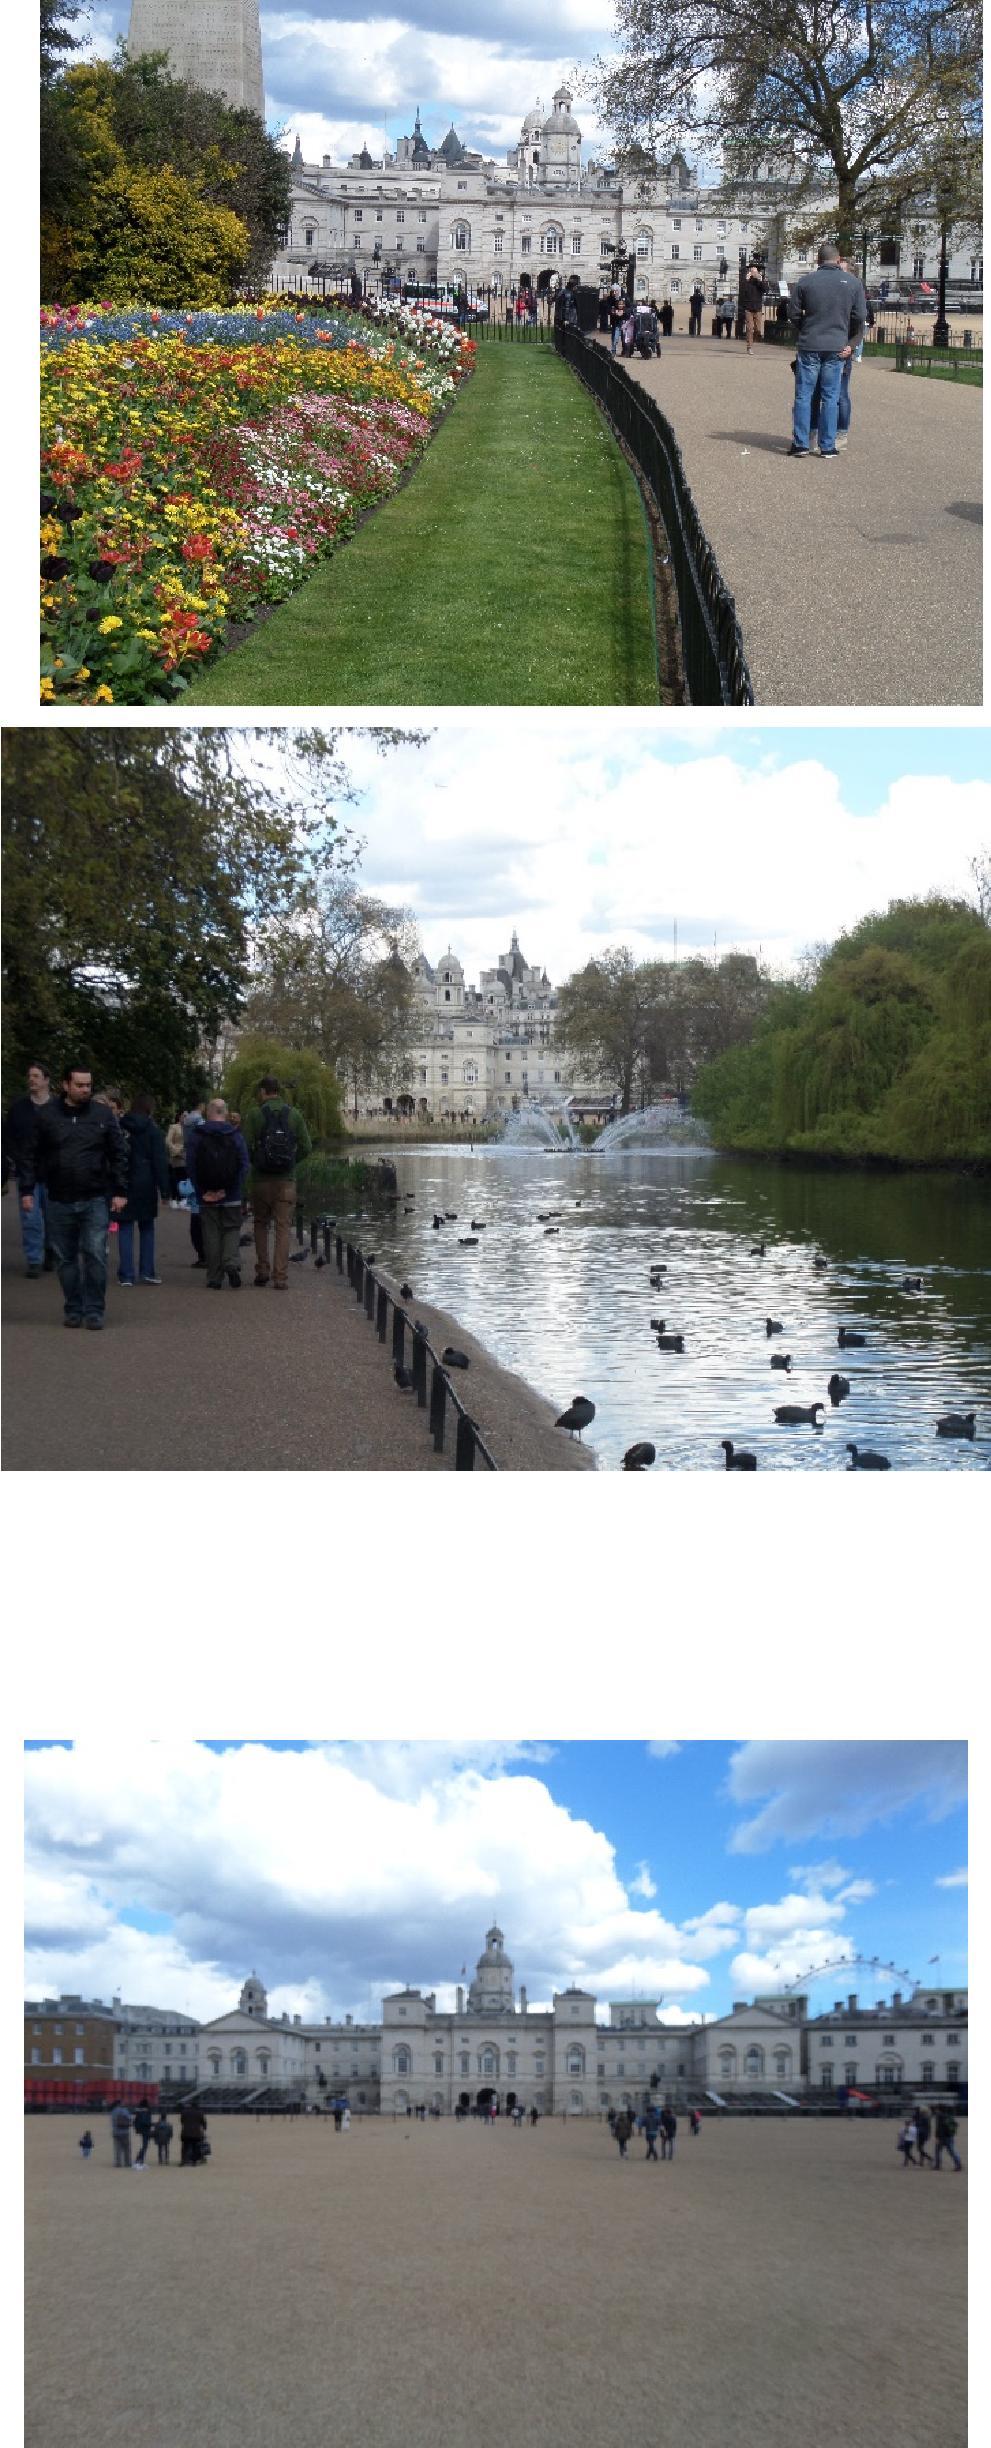 After viewing the palace, you can walk back through St James Park to Horse Guards Parade.